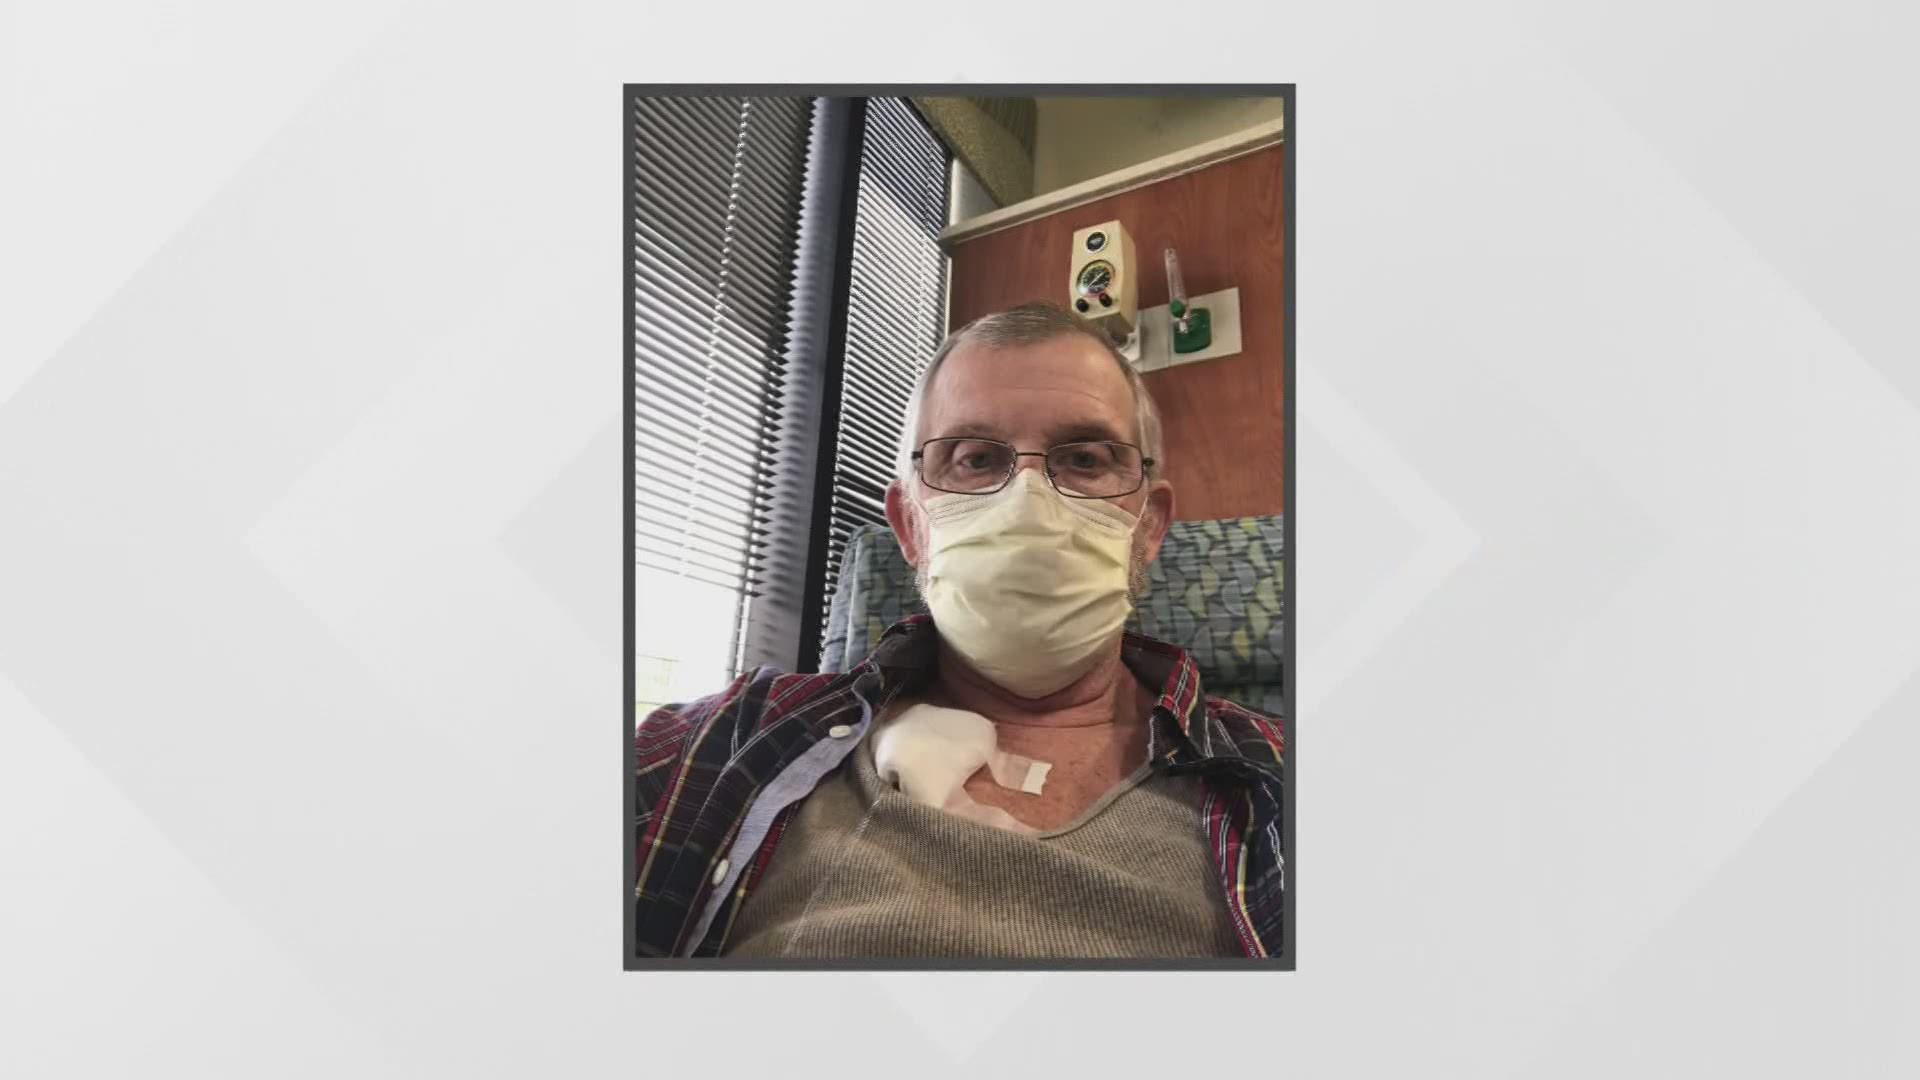 His first diagnosis came in 2015: cancer in the left lung. Four months of chemo seemed to do the trick. Four years later, things took a dramatic turn.